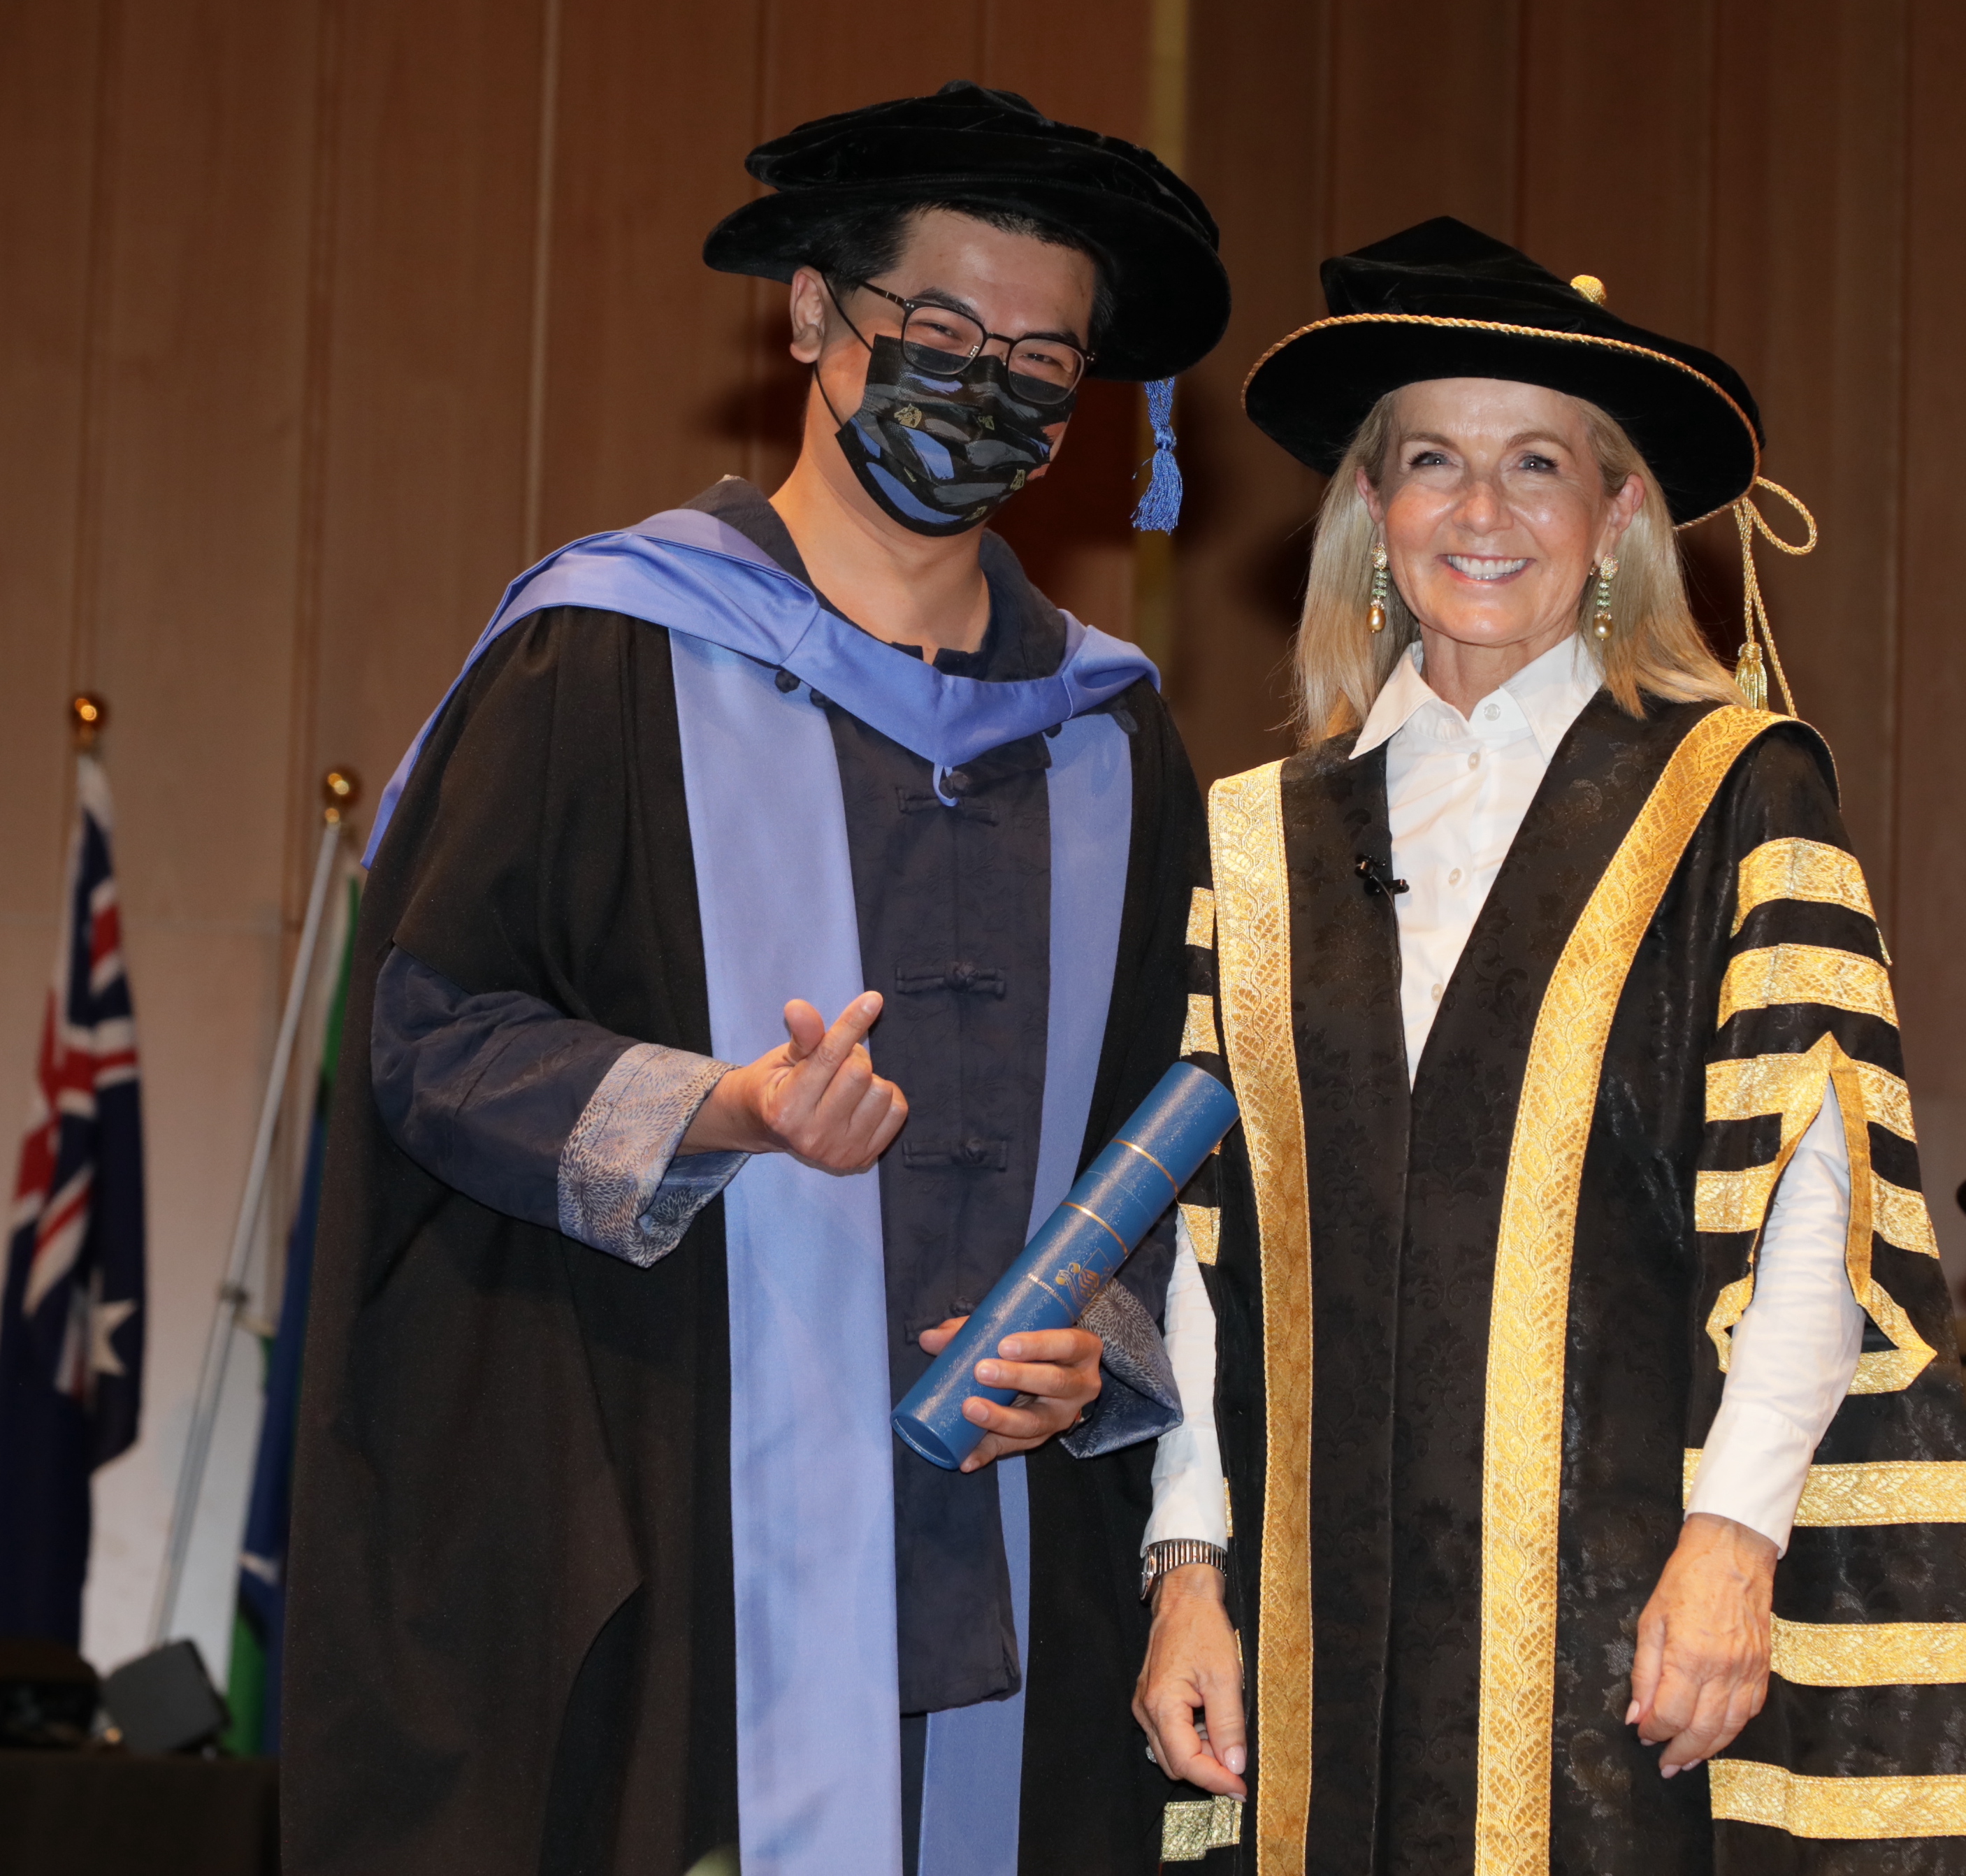 Yi-Tsun's profile photo taken with the former Miniter for Foreign Affairs, Julie Bishoon on the stage of graduation